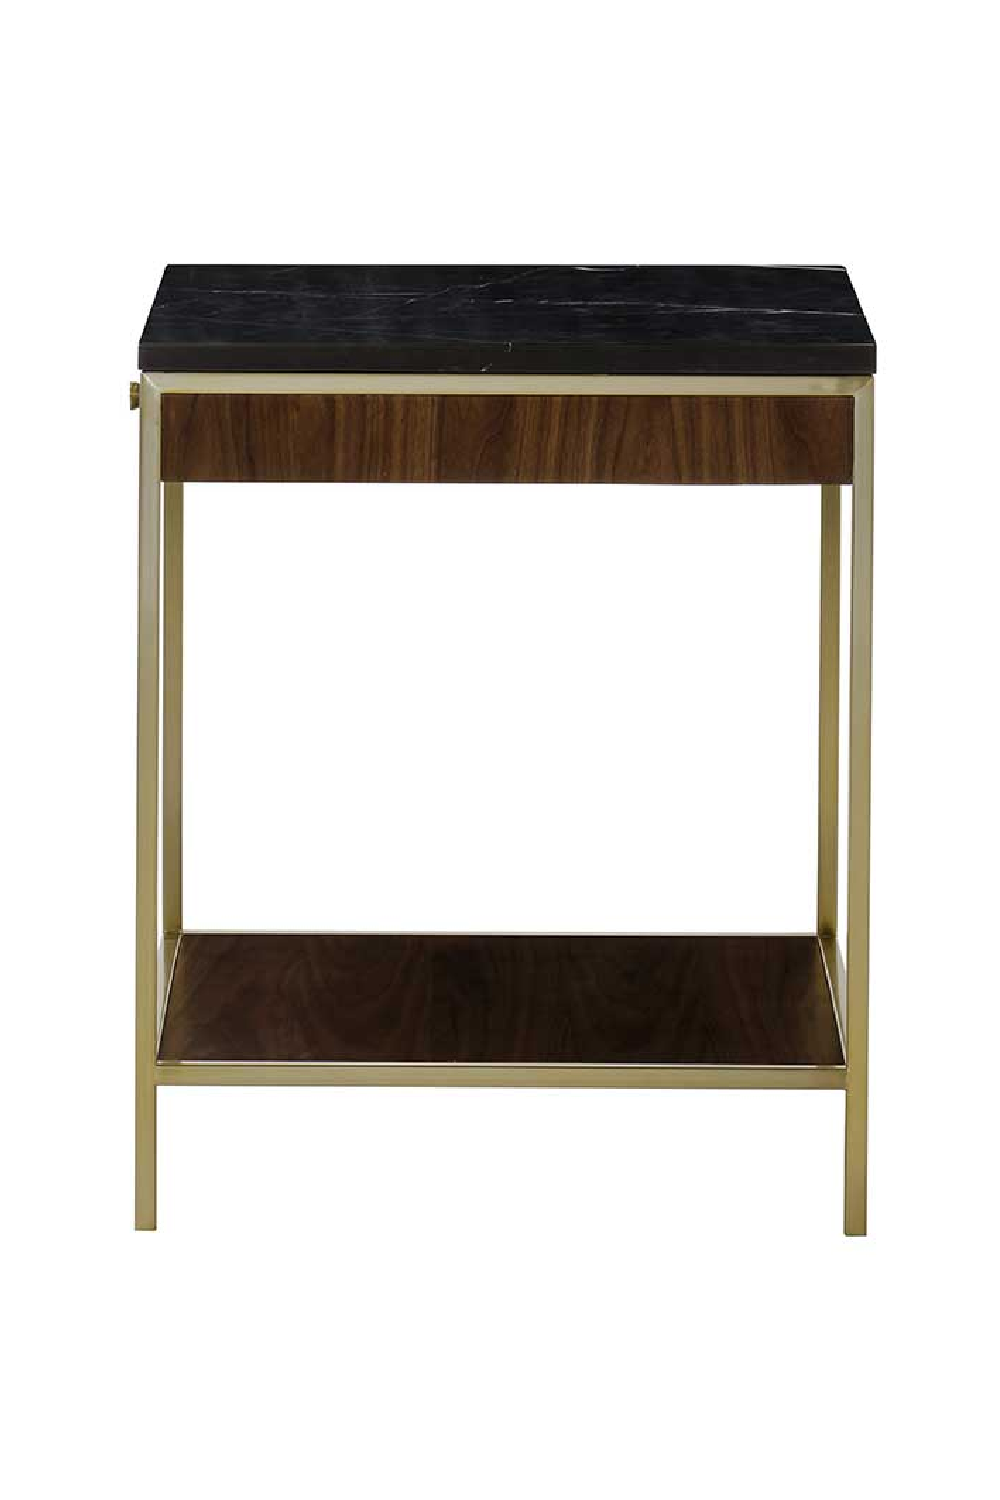 Black Marble Top Square Side Table S | Andrew Martin Chester | Oroa.com